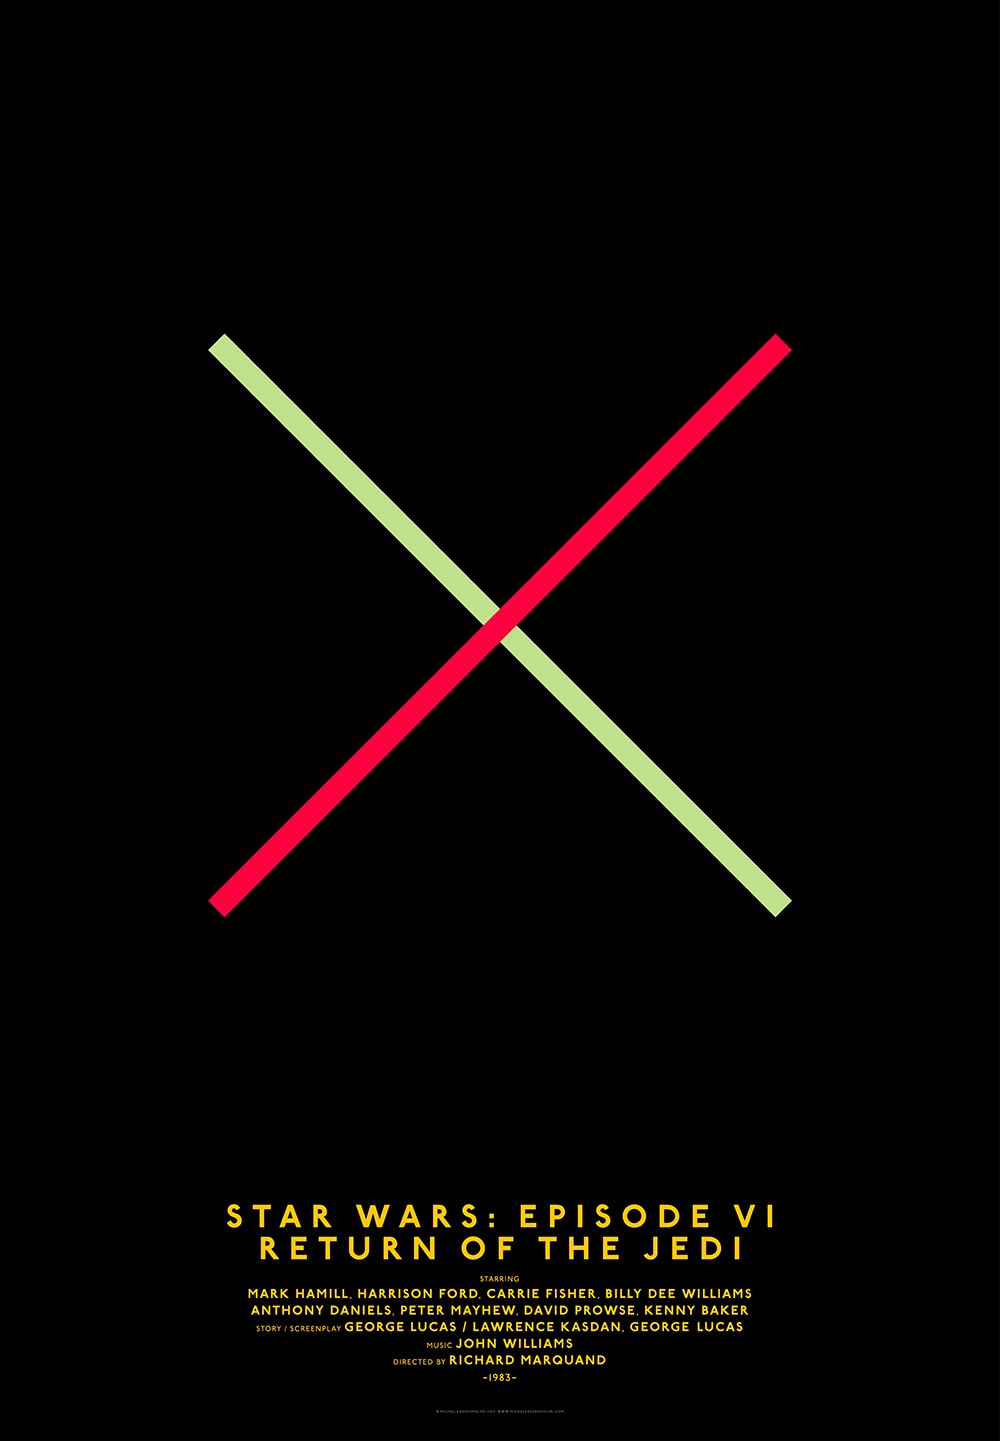 movie poster for Return of the Jedi featuring two colored lines representing light sabers